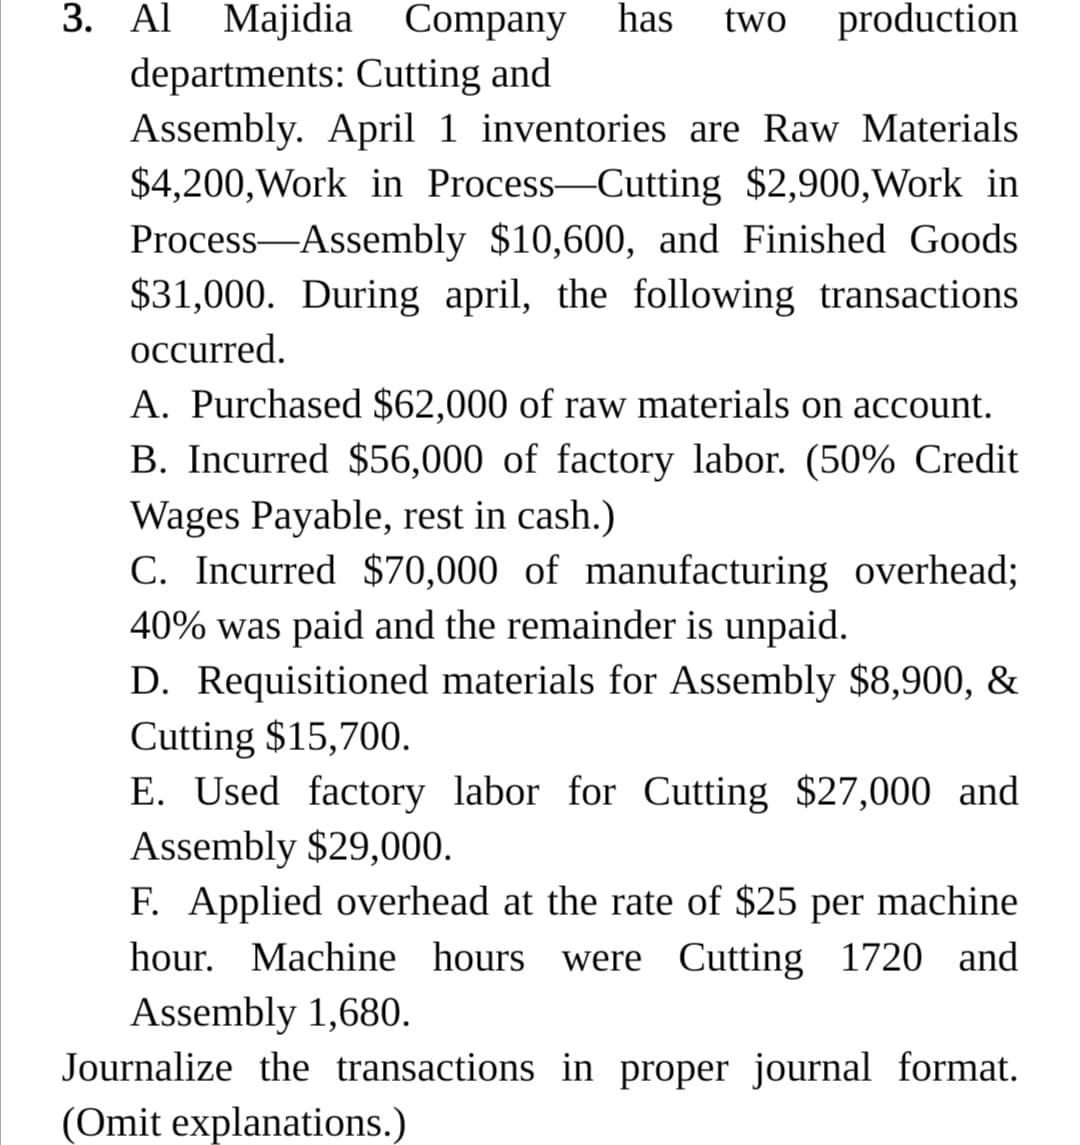 3. Al Majidia Company
has
two
production
departments: Cutting and
Assembly. April 1 inventories are Raw Materials
$4,200,Work in Process-Cutting $2,900,Work in
Process-Assembly $10,600, and Finished Goods
$31,000. During april, the following transactions
occurred.
A. Purchased $62,000 of raw materials on account.
B. Incurred $56,000 of factory labor. (50% Credit
Wages Payable, rest in cash.)
C. Incurred $70,000 of manufacturing overhead;
40% was paid and the remainder is unpaid.
D. Requisitioned materials for Assembly $8,900, &
Cutting $15,700.
E. Used factory labor for Cutting $27,000 and
Assembly $29,000.
F. Applied overhead at the rate of $25 per machine
hour. Machine hours were Cutting 1720 and
Assembly 1,680.
Journalize the transactions in proper journal format.
(Omit explanations.)
